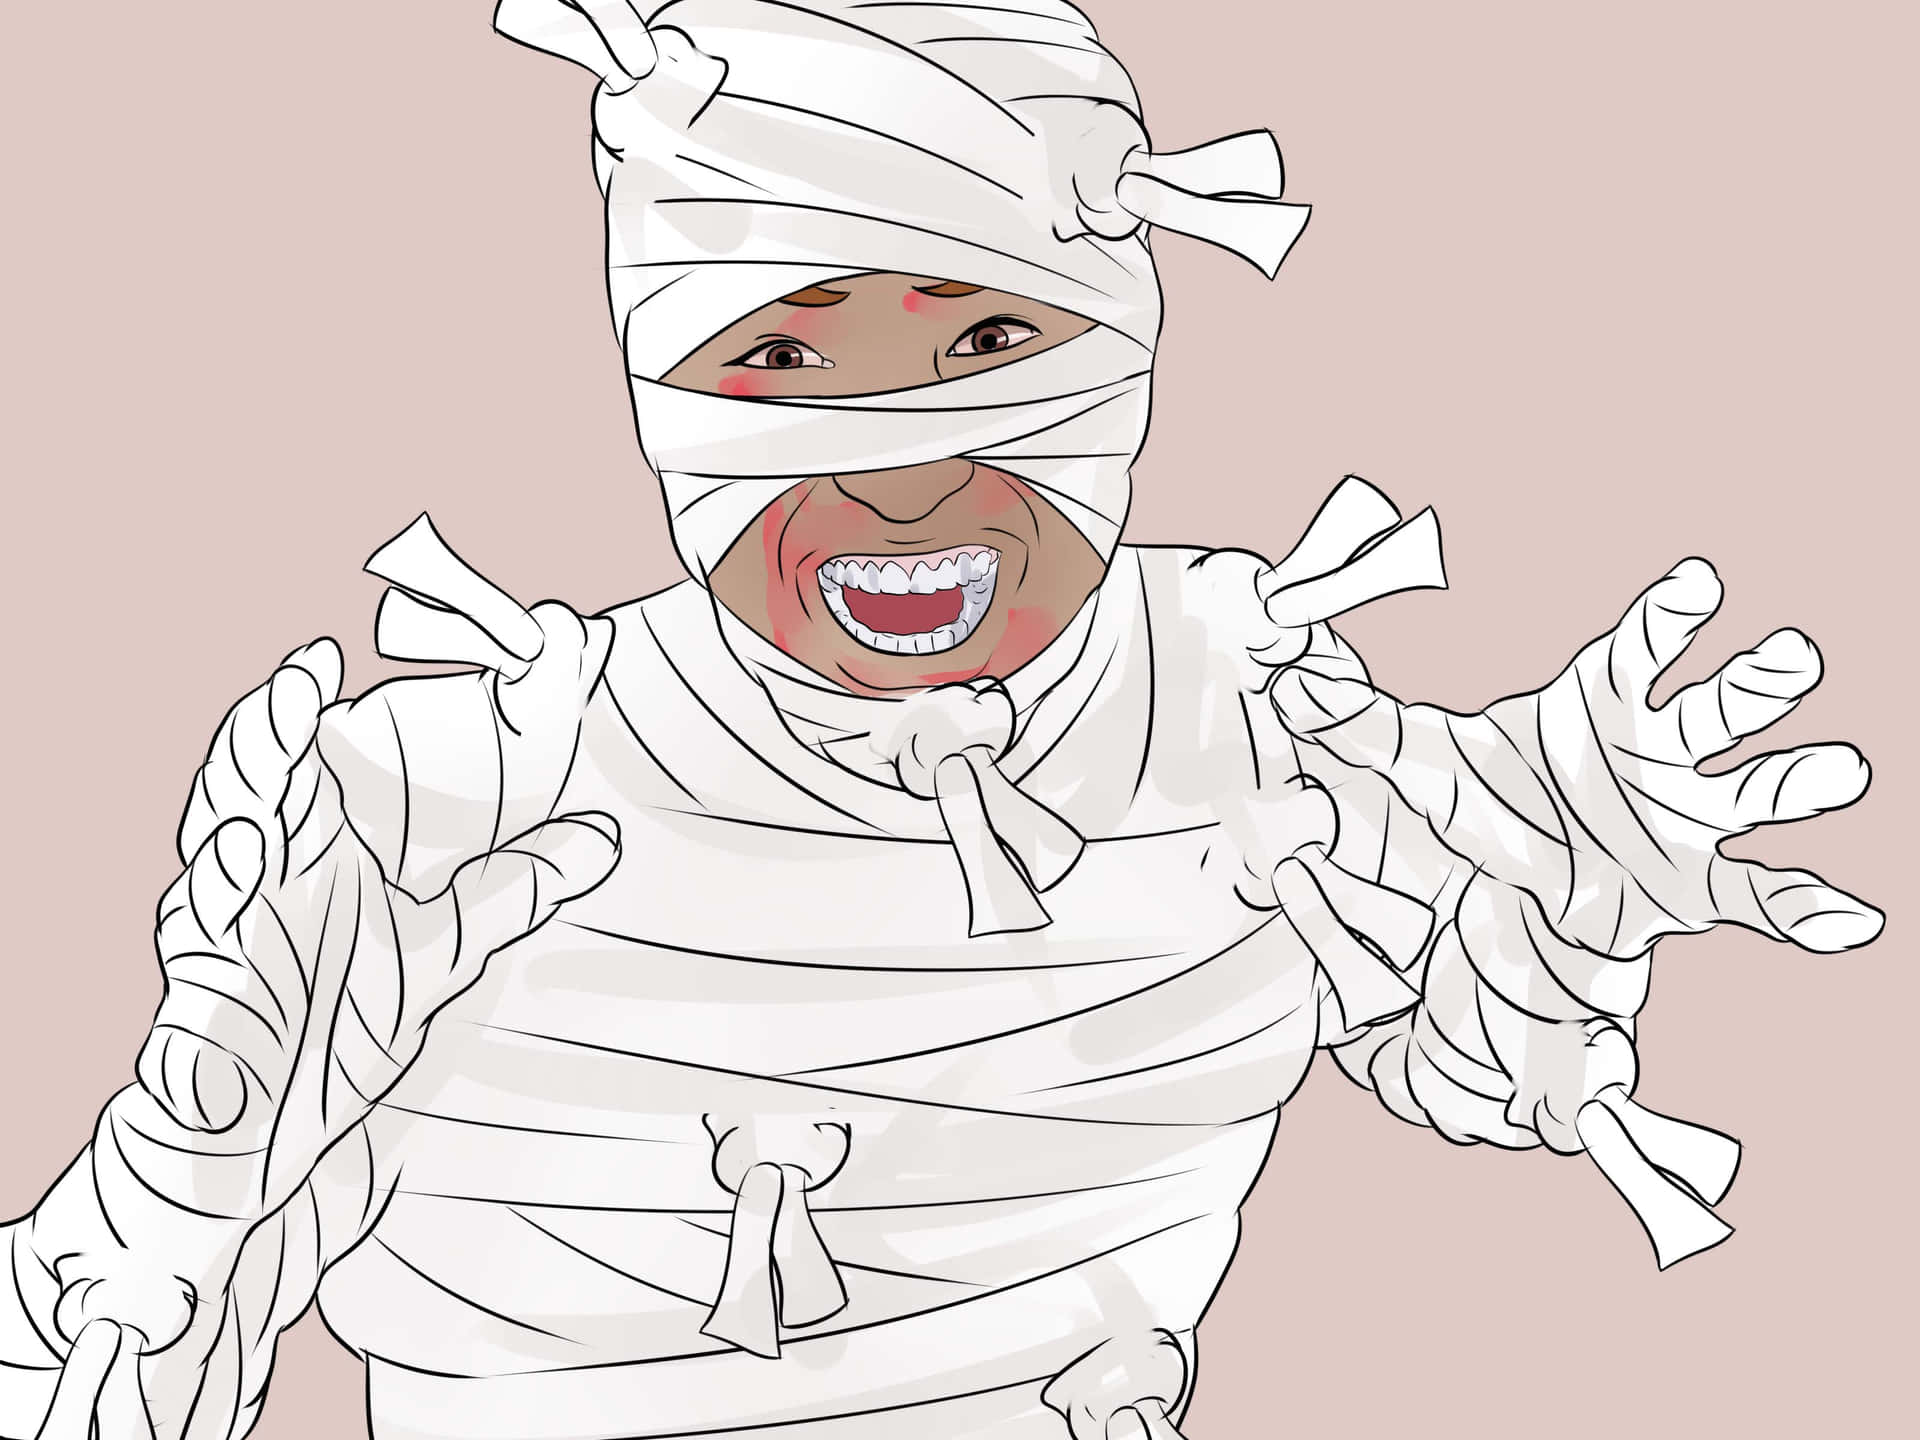 Get ready to rock your mummy costume this Halloween! Wallpaper